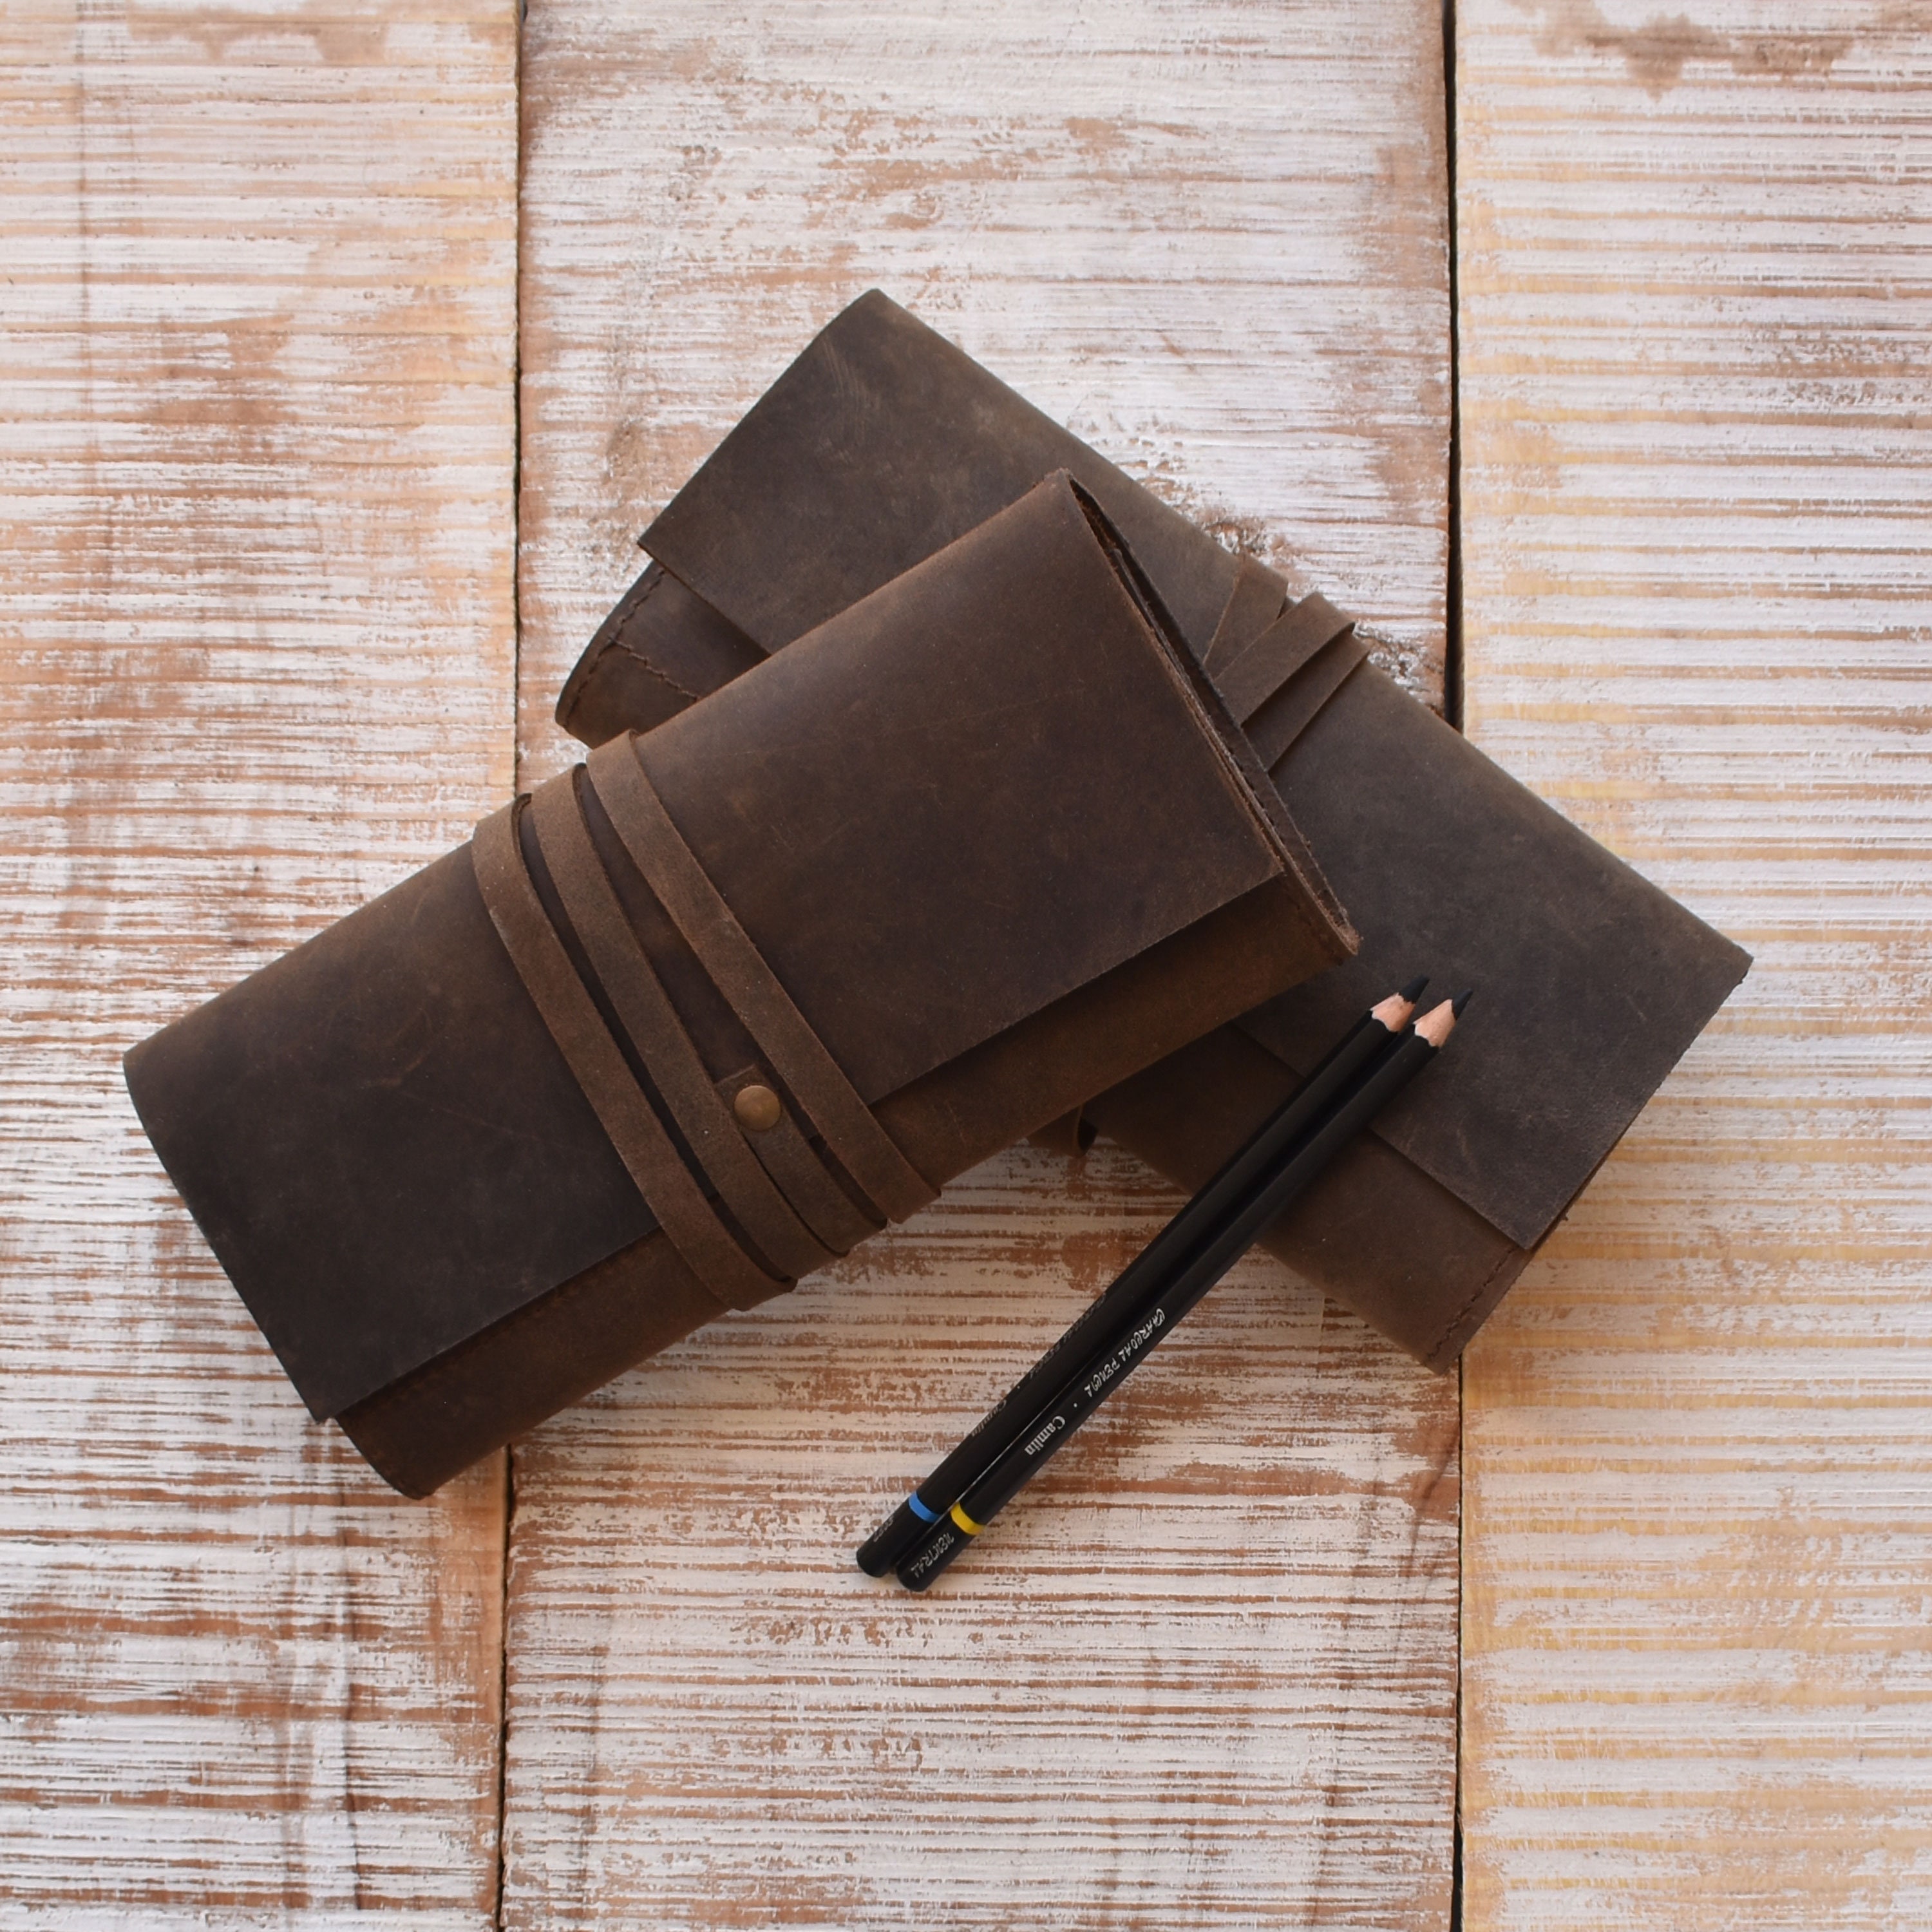  Rustic Genuine Leather Pencil Roll - Pen and Pencil Case - Dark  Brown : Arts, Crafts & Sewing